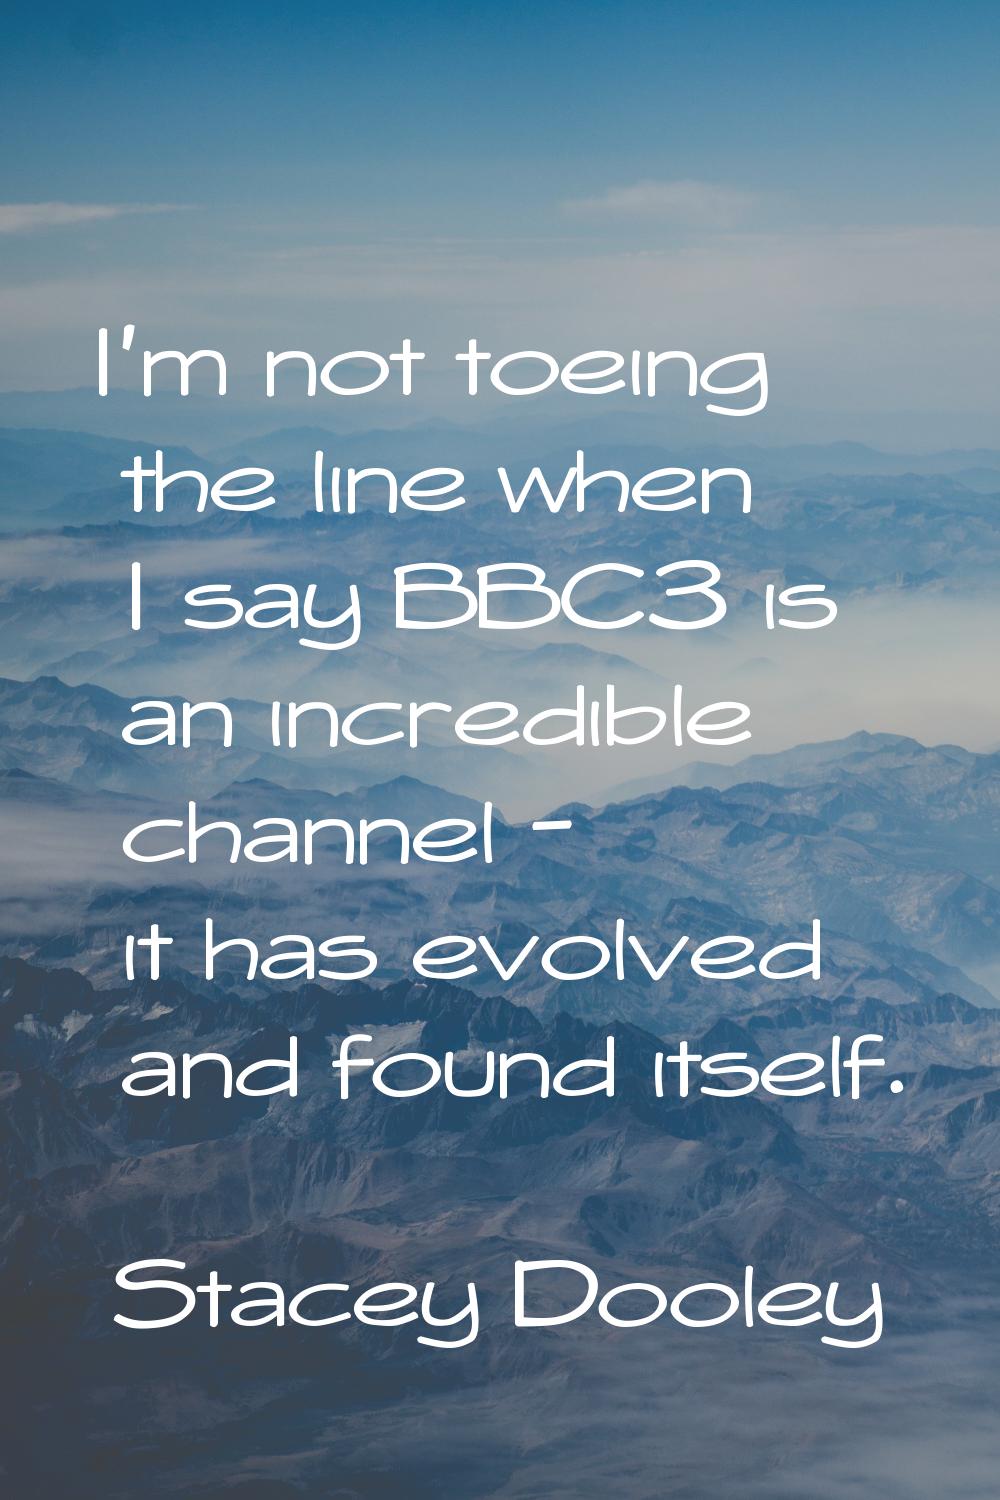 I'm not toeing the line when I say BBC3 is an incredible channel - it has evolved and found itself.